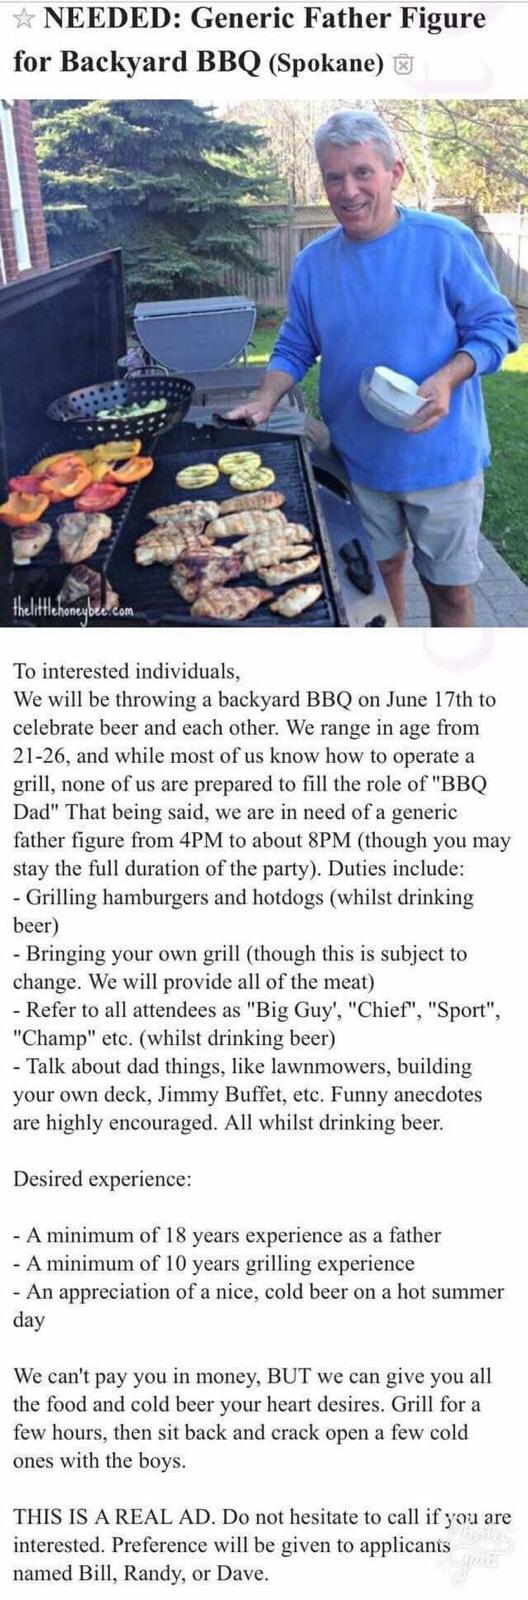 NOW HIRING! Generic Father Figure For BBQ